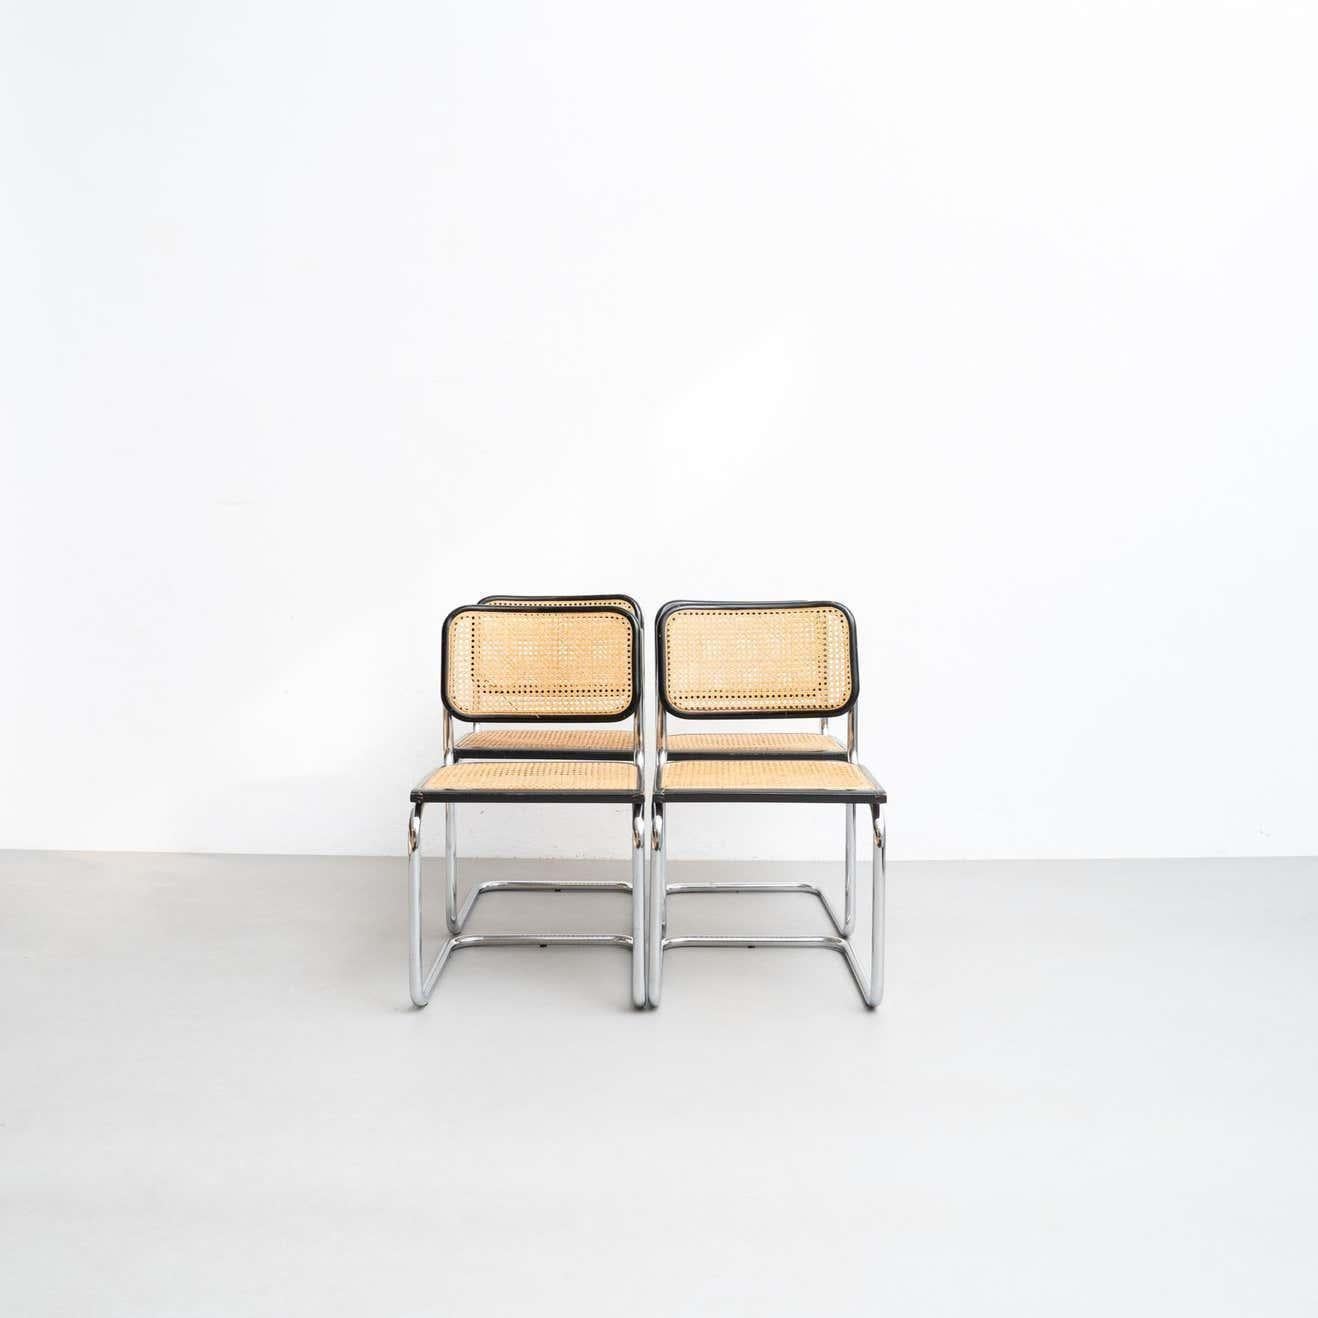 Set of 4 Marcel Breuer Cesca Metal and Wood Mid-Century Modern Chairs, c 1960 For Sale 7